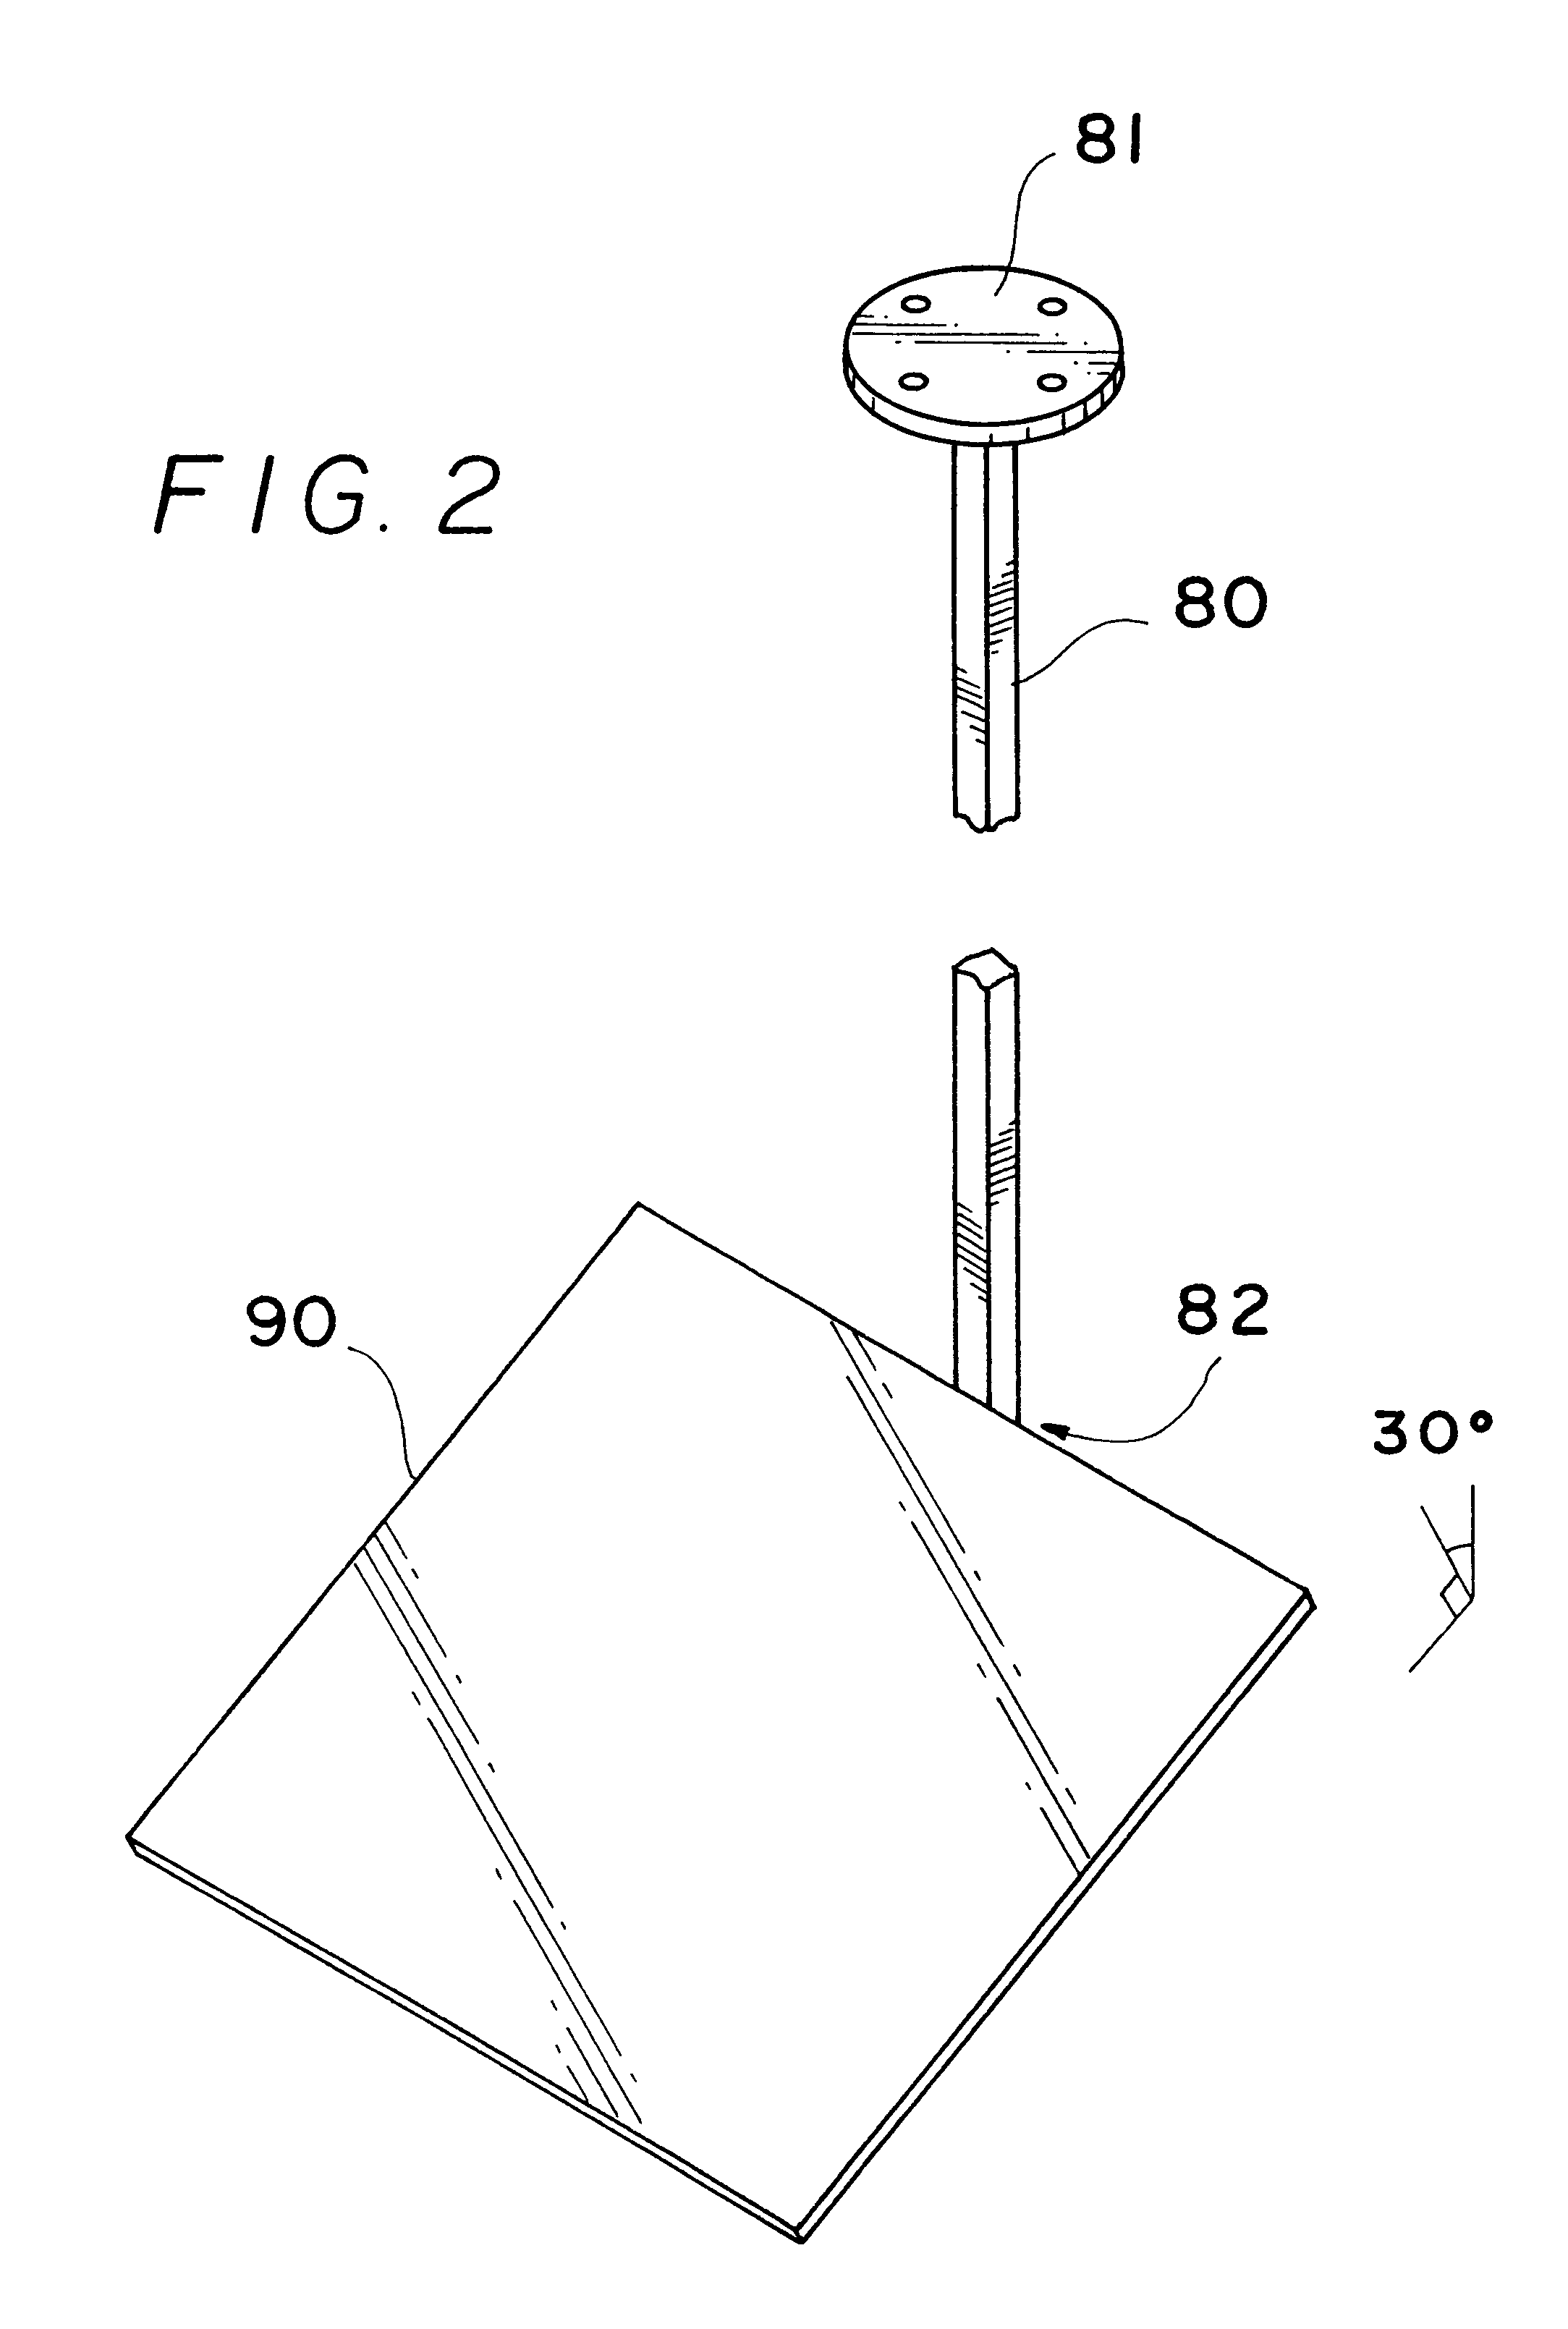 Video display system for locating a projected image adjacent a surgical field